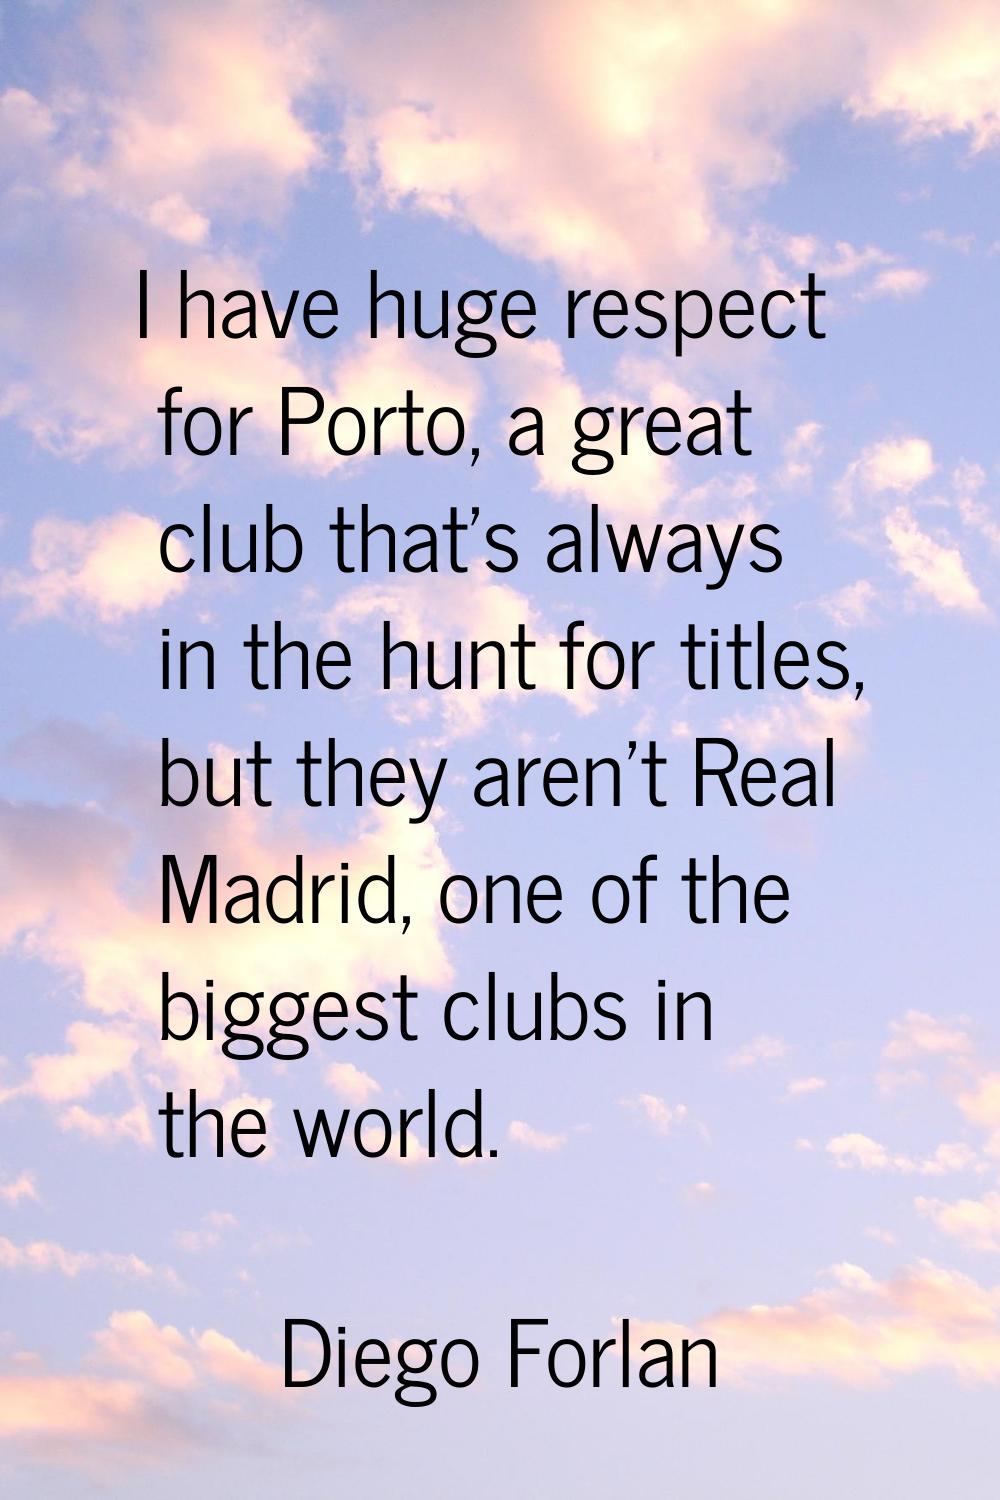 I have huge respect for Porto, a great club that's always in the hunt for titles, but they aren't R